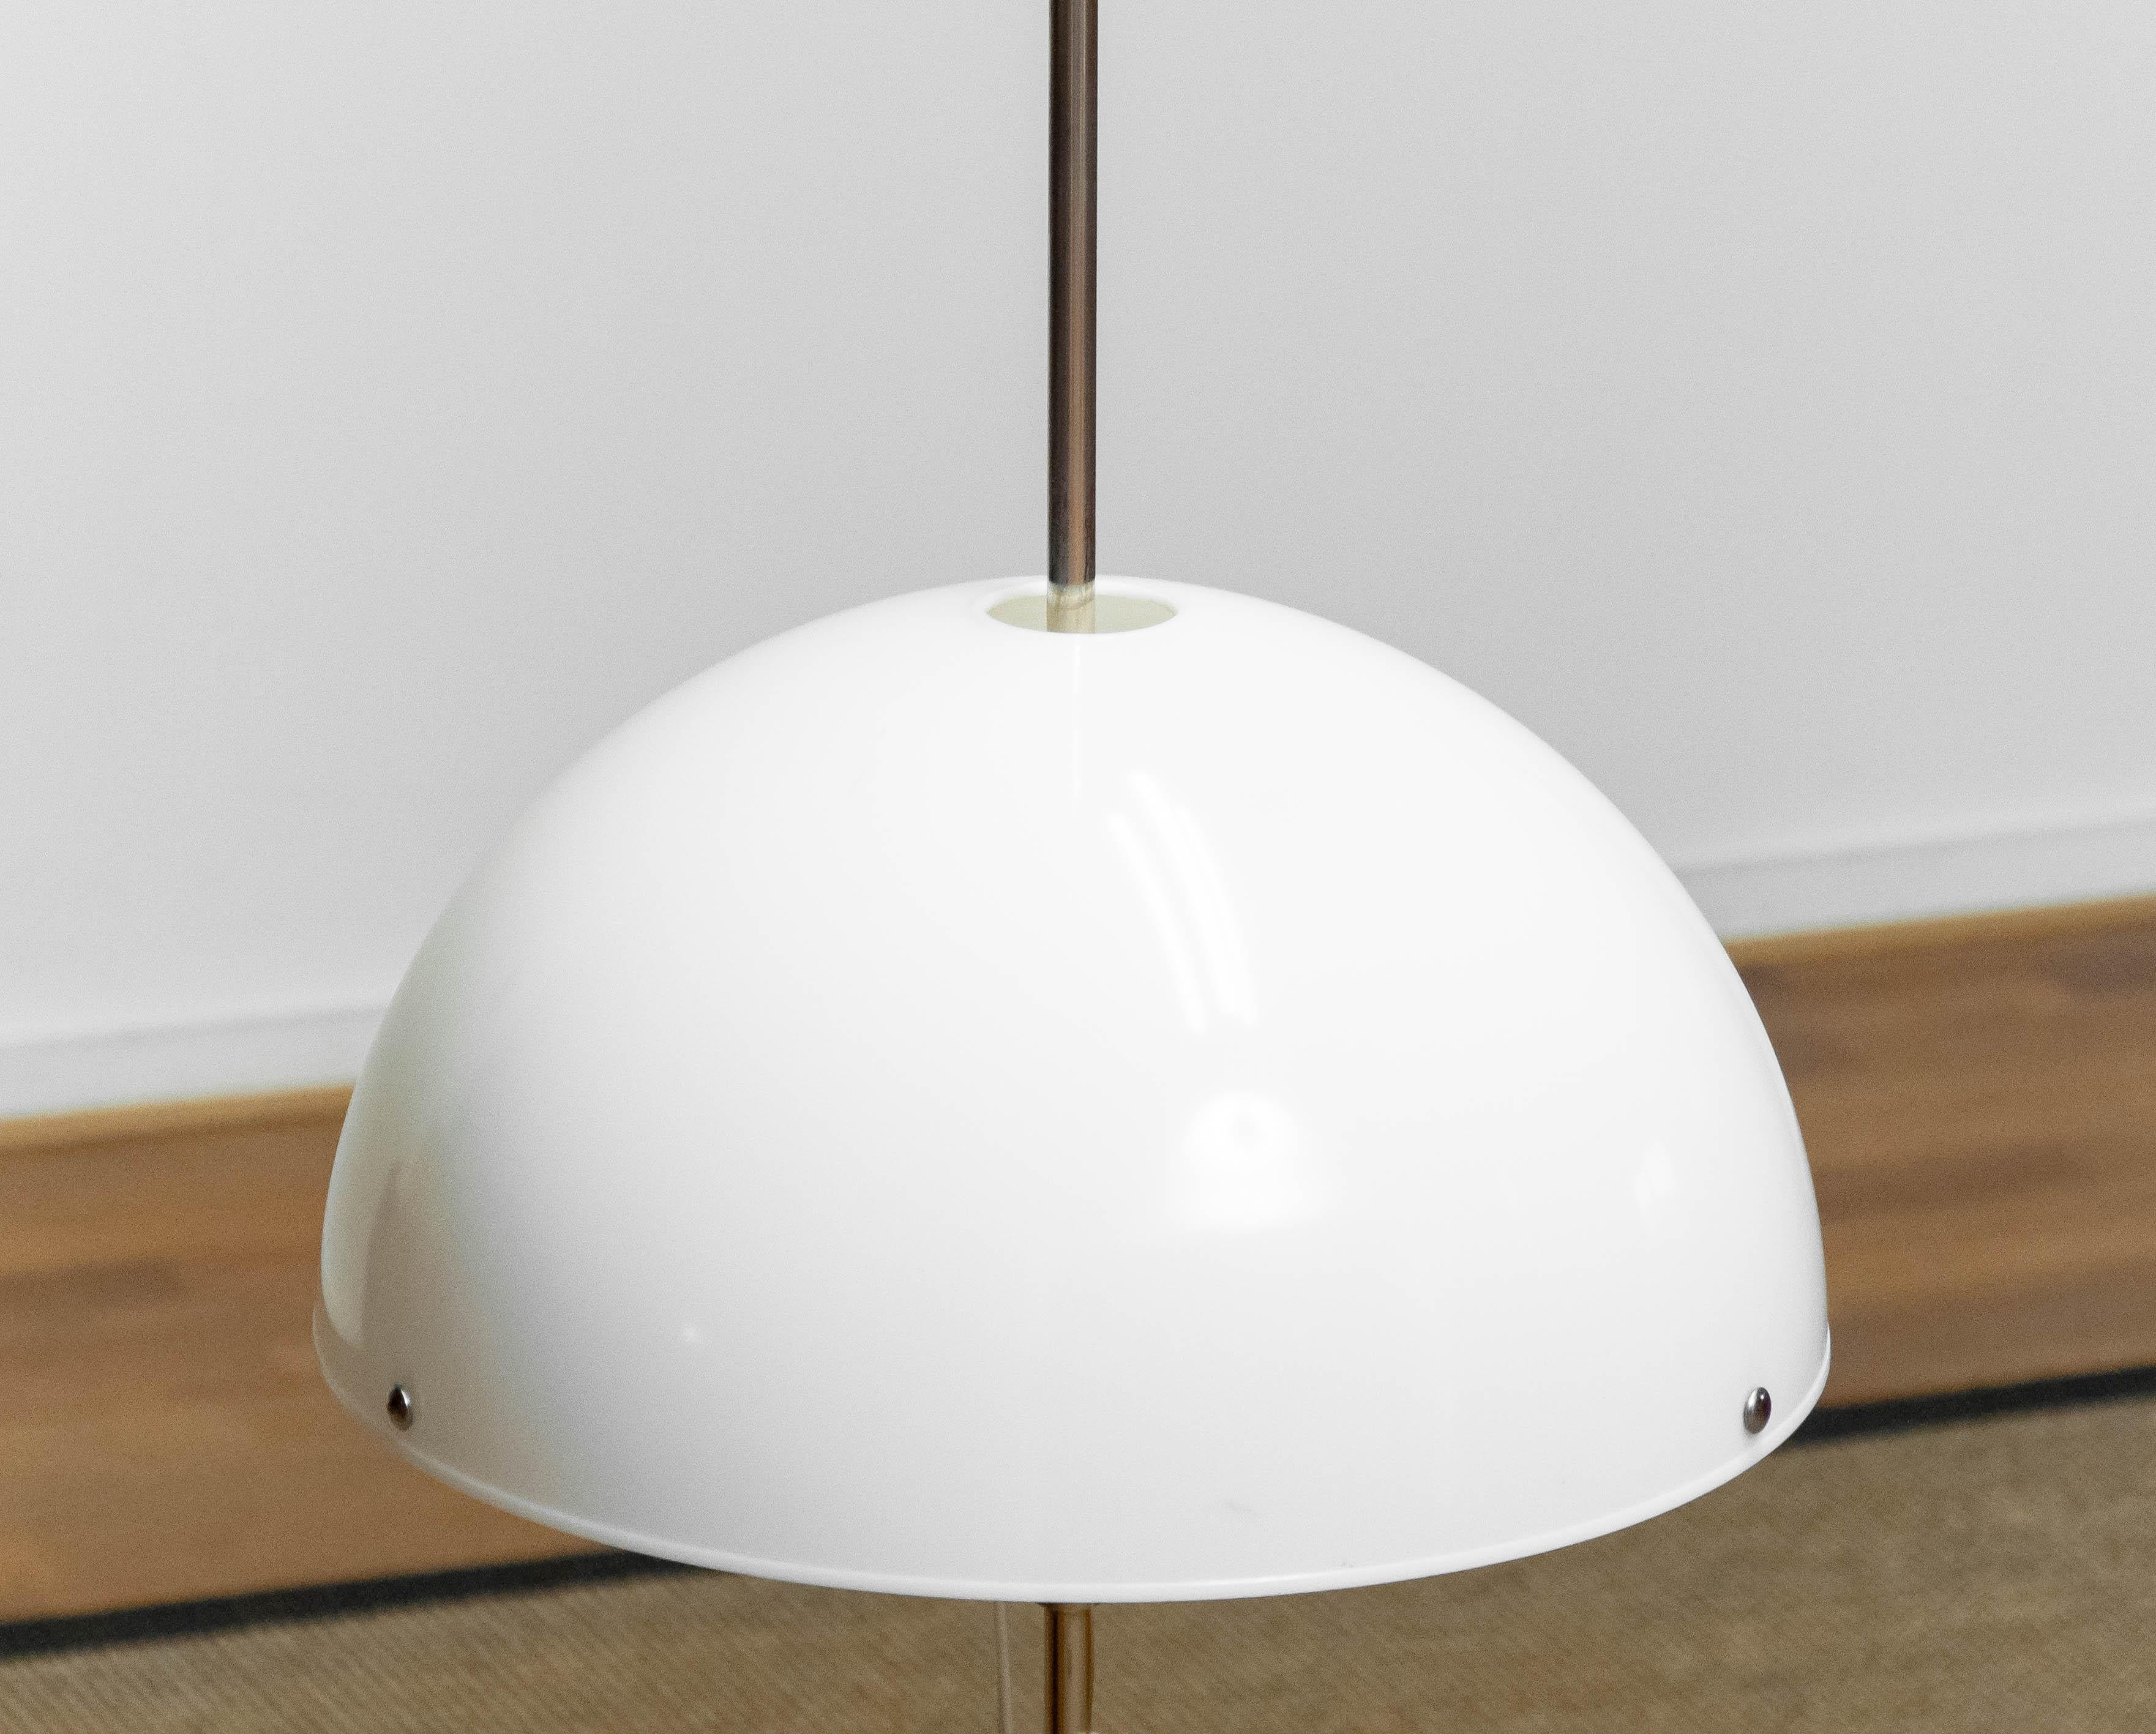 Modern 1970's Chrome and White Acrylic Mushroom Floor Lamp Made by Fagerhult Sweden For Sale